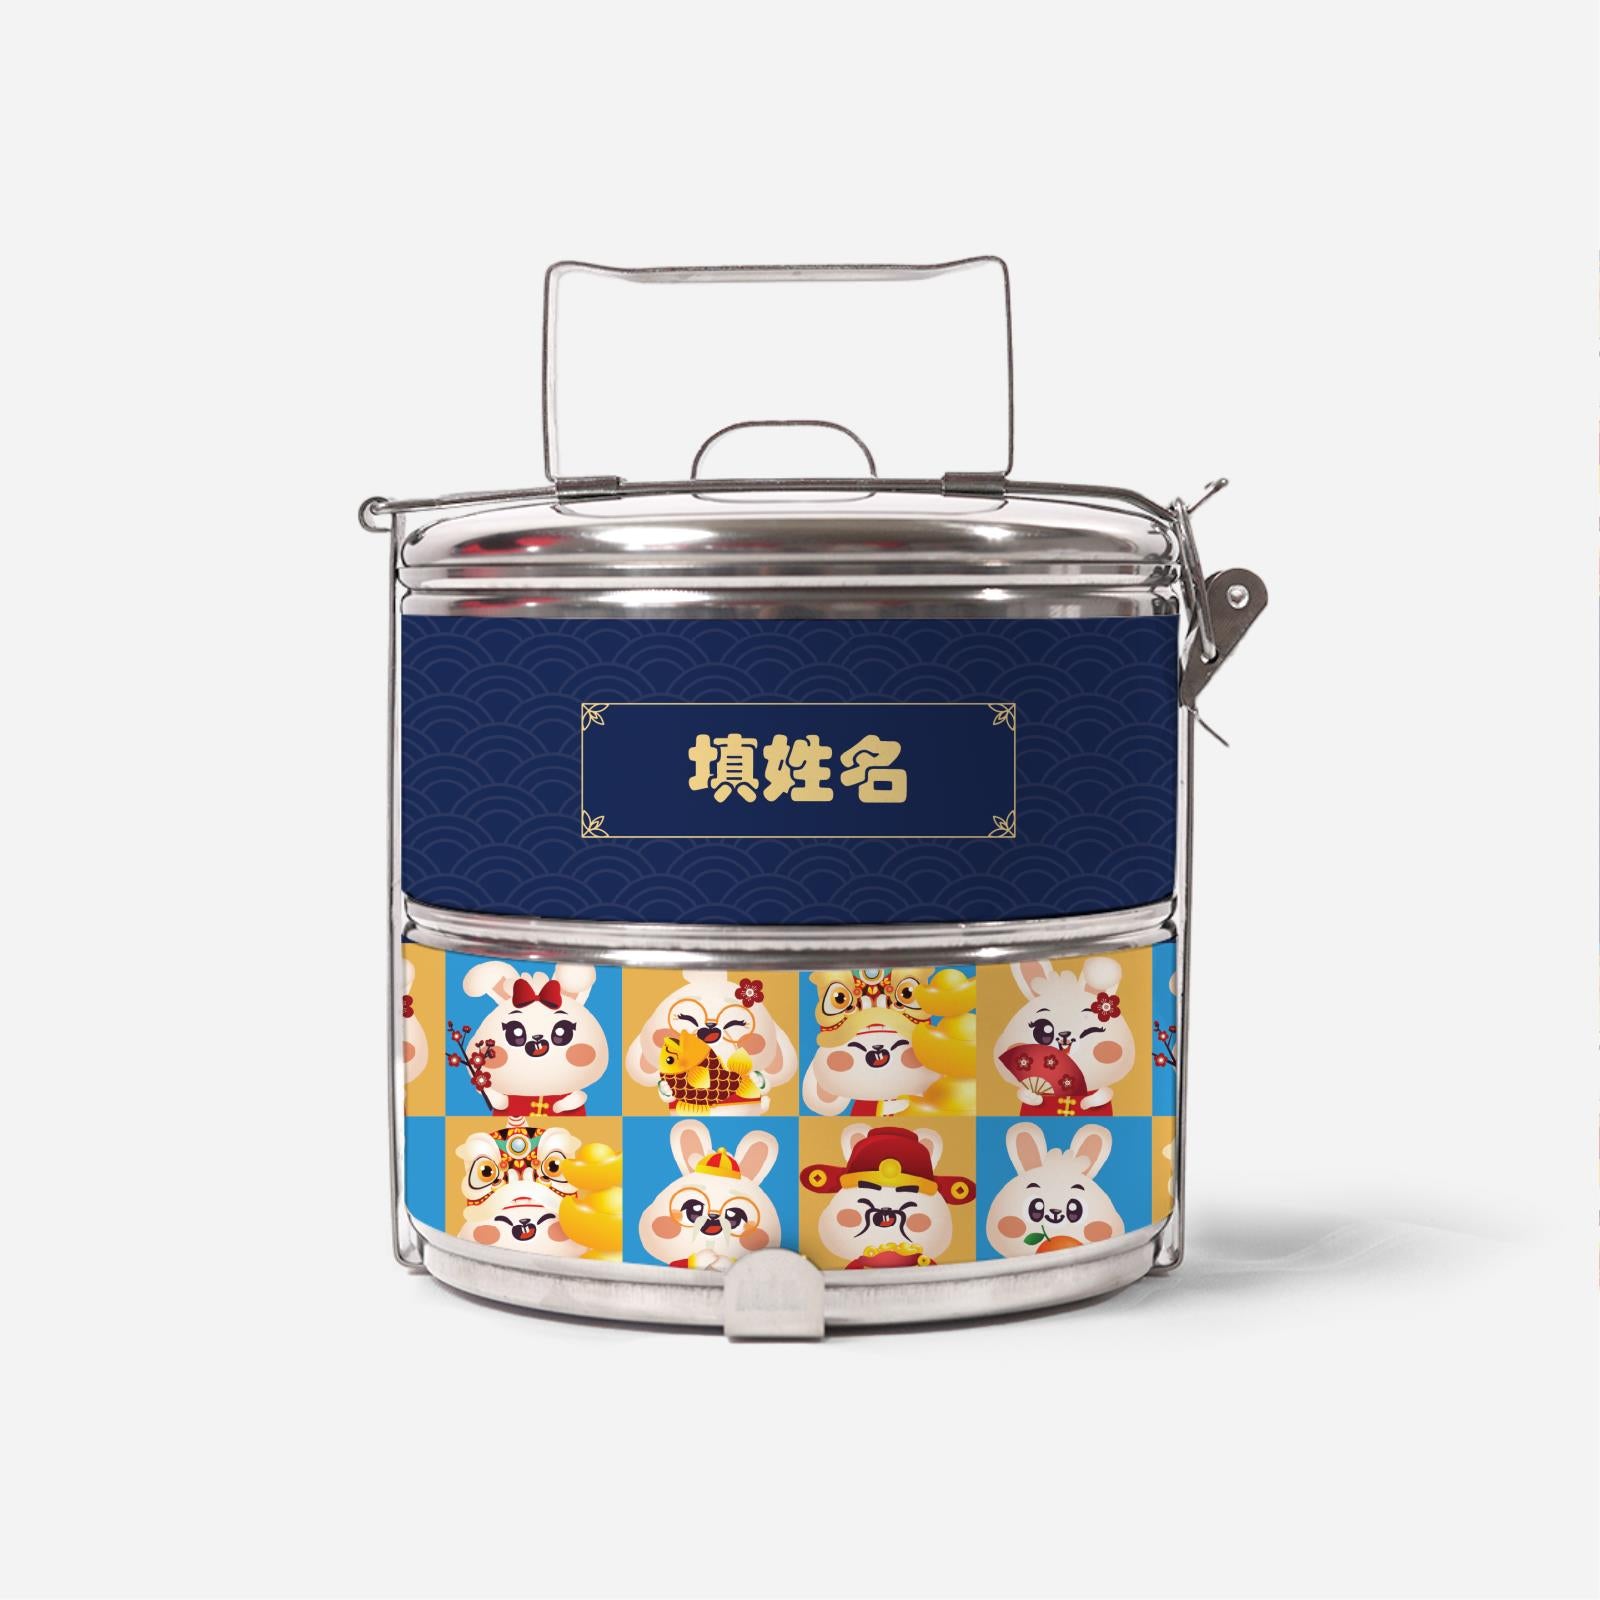 Cny Rabbit Family - Rabbit Family Blue Two-Tier Standard Tififn Carrier With Chinese Personalization